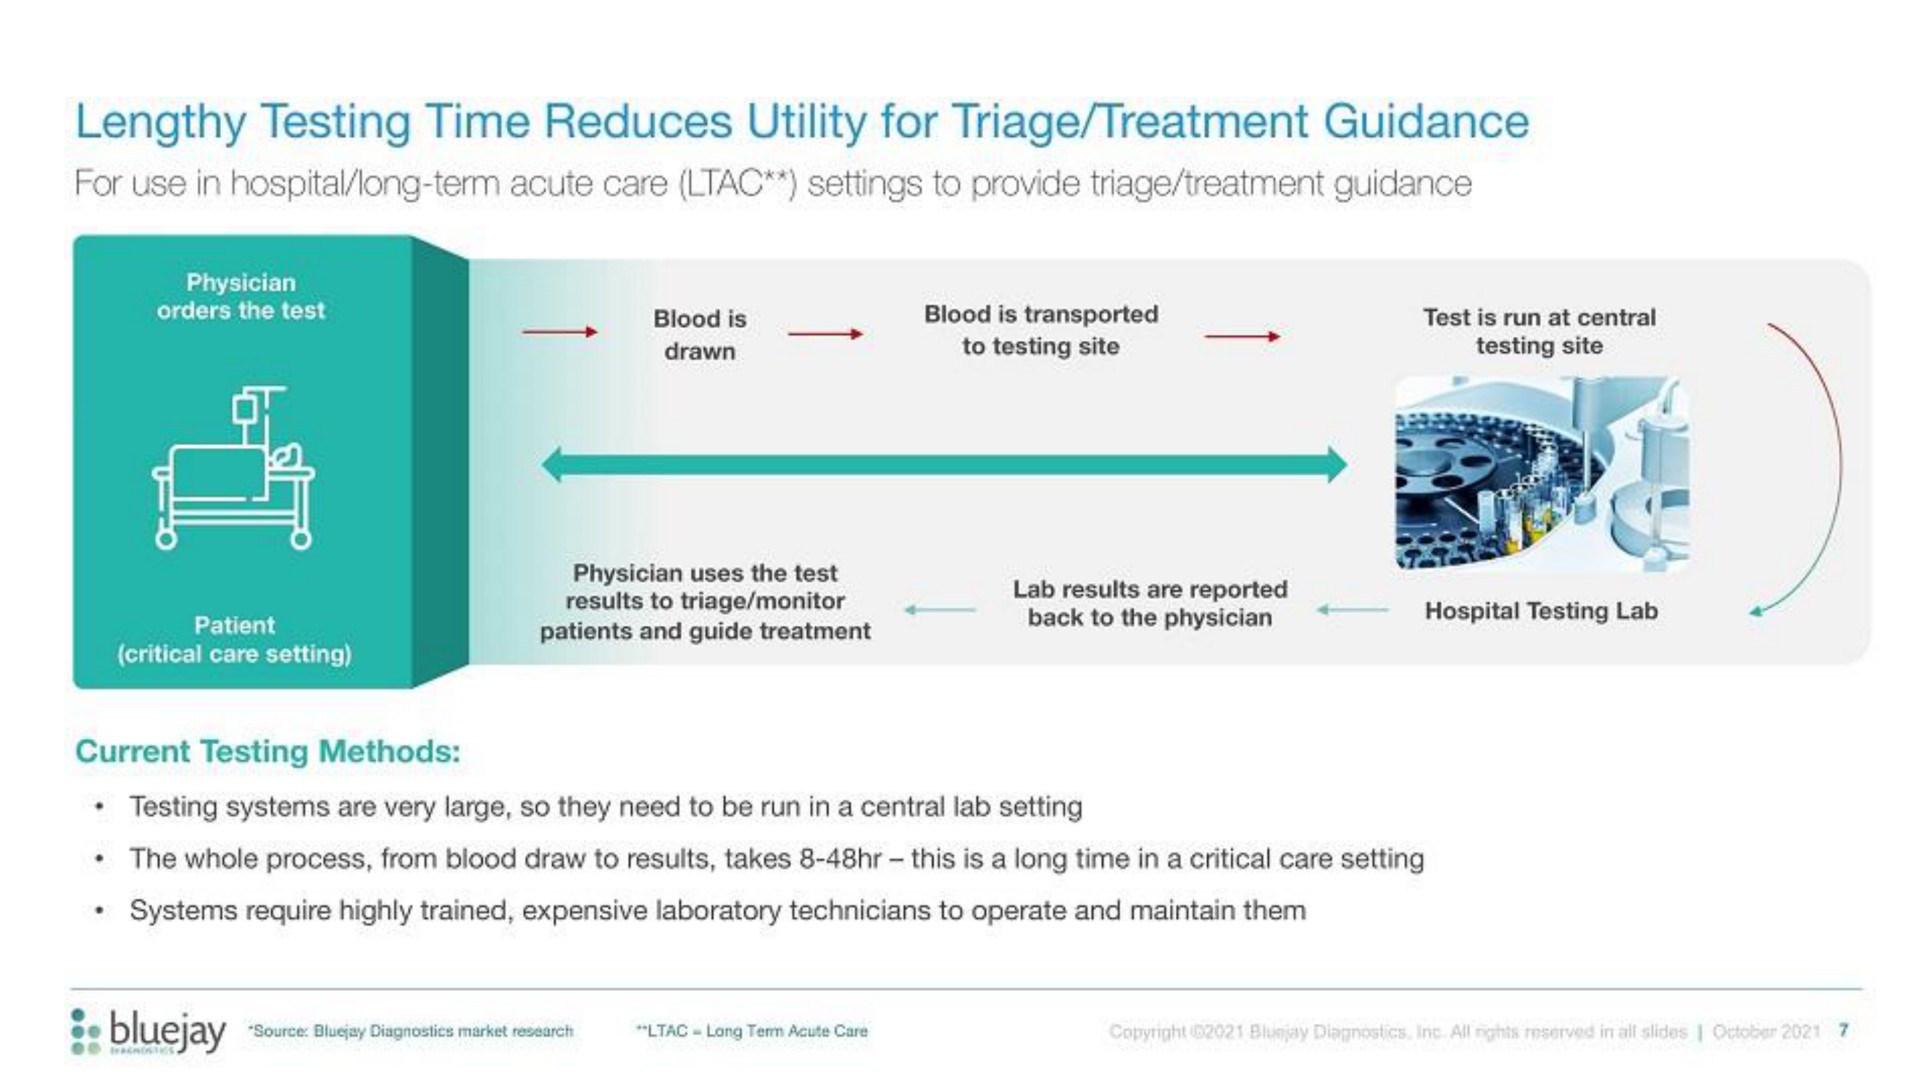 lengthy testing time reduces utility for triage treatment guidance | Bluejay